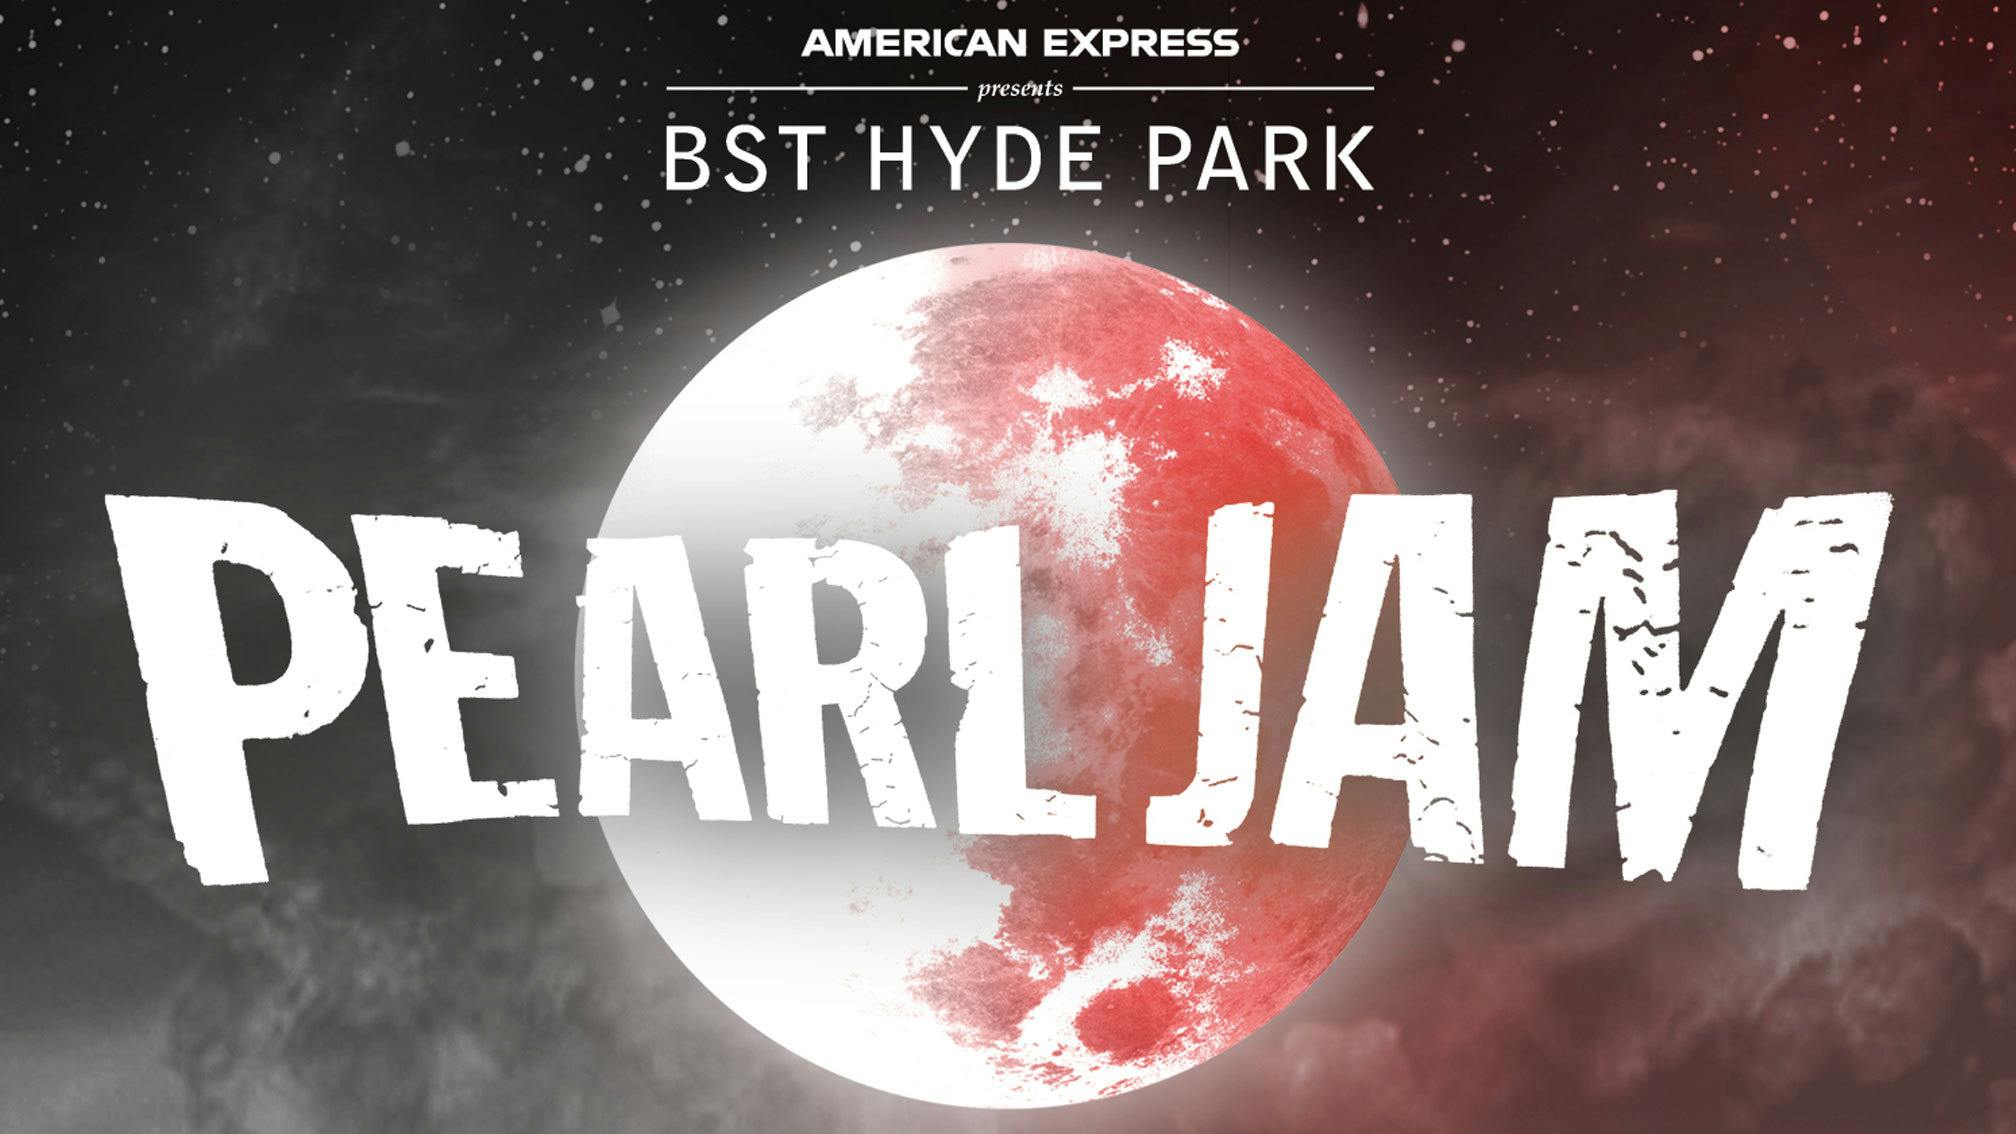 Pearl Jam confirm full line-up for massive BST Hyde Park shows